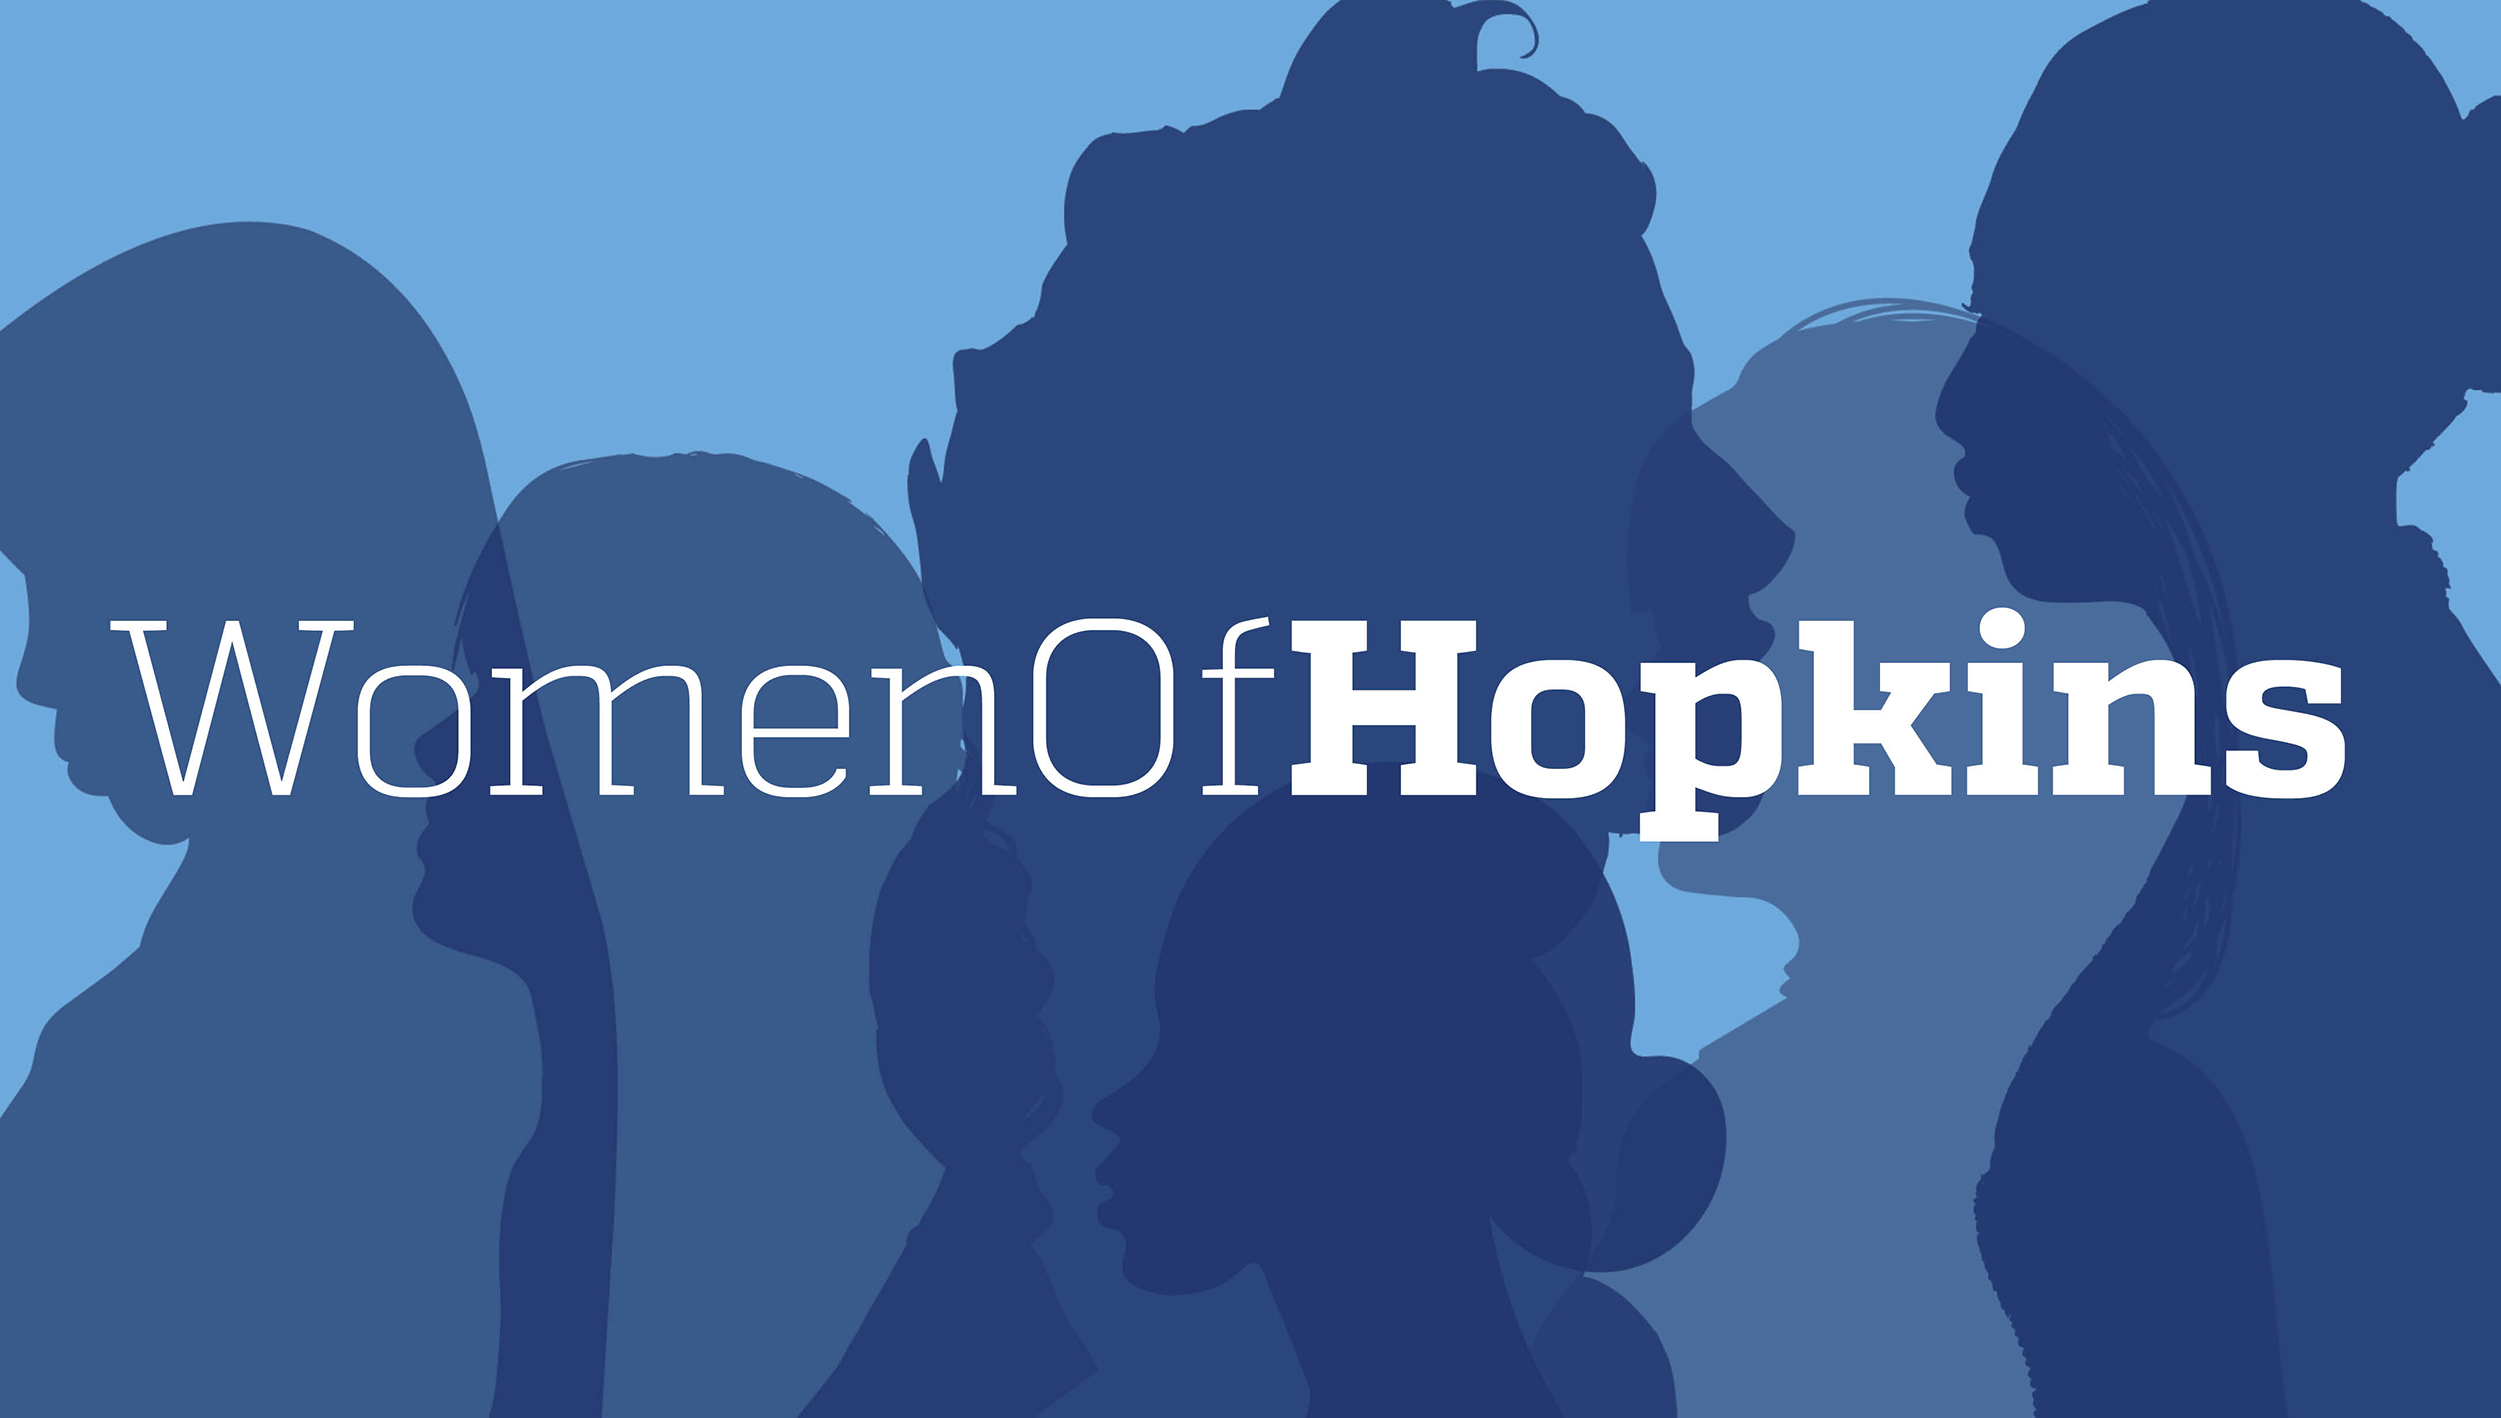 Silhouettes of Women with a network pattern on the background